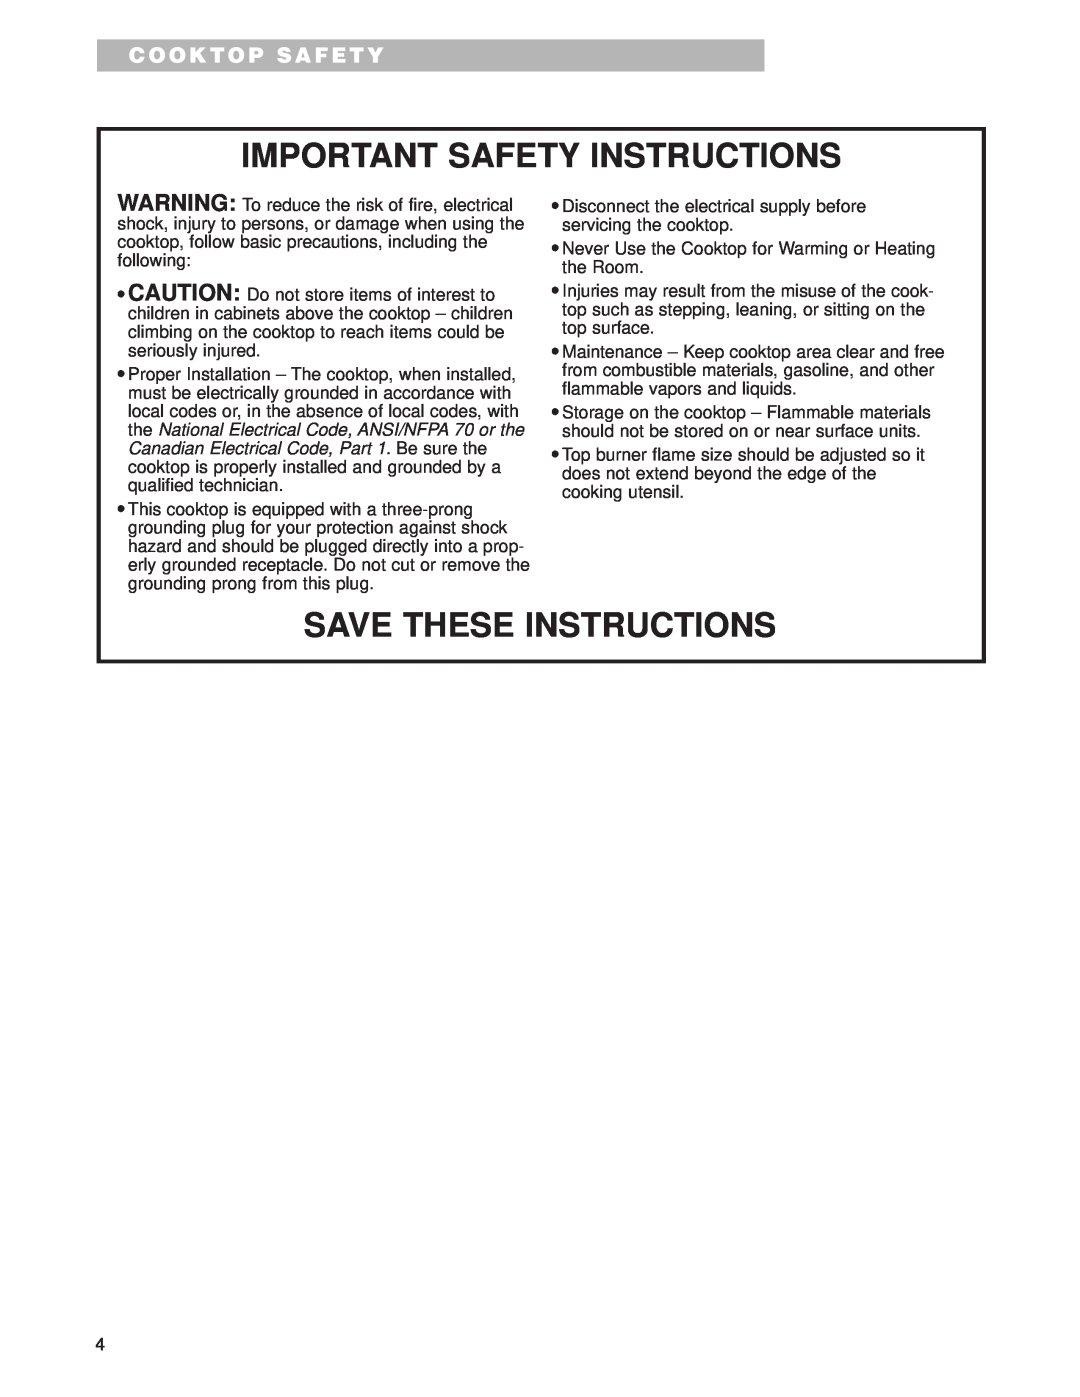 Whirlpool GLT3615G warranty Important Safety Instructions, Save These Instructions, Cooktop Safety 